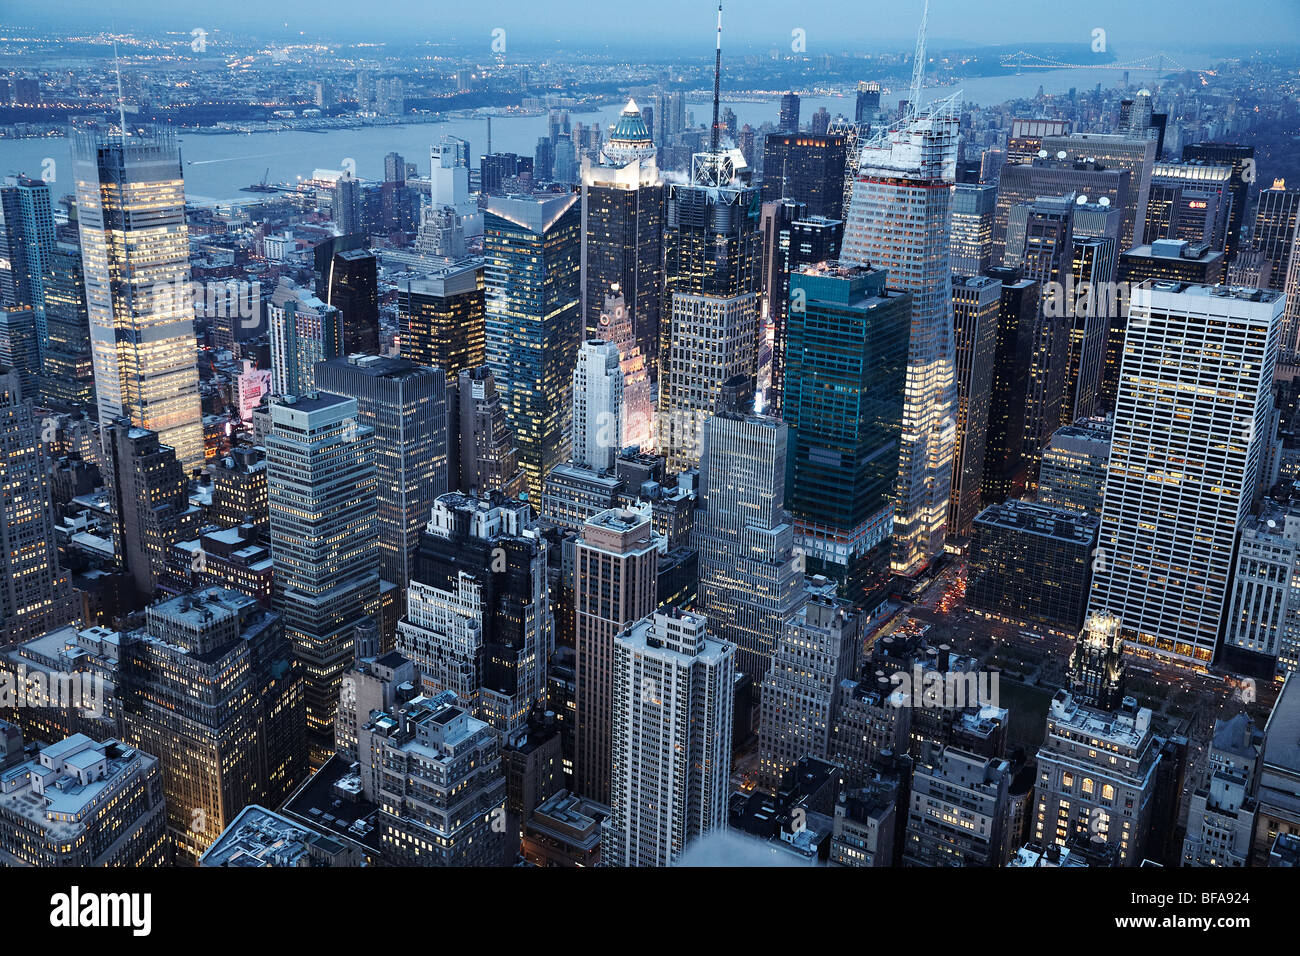 Evening view towards Times Square from the Empire State Building, Manhattan, New York City, USA Stock Photo